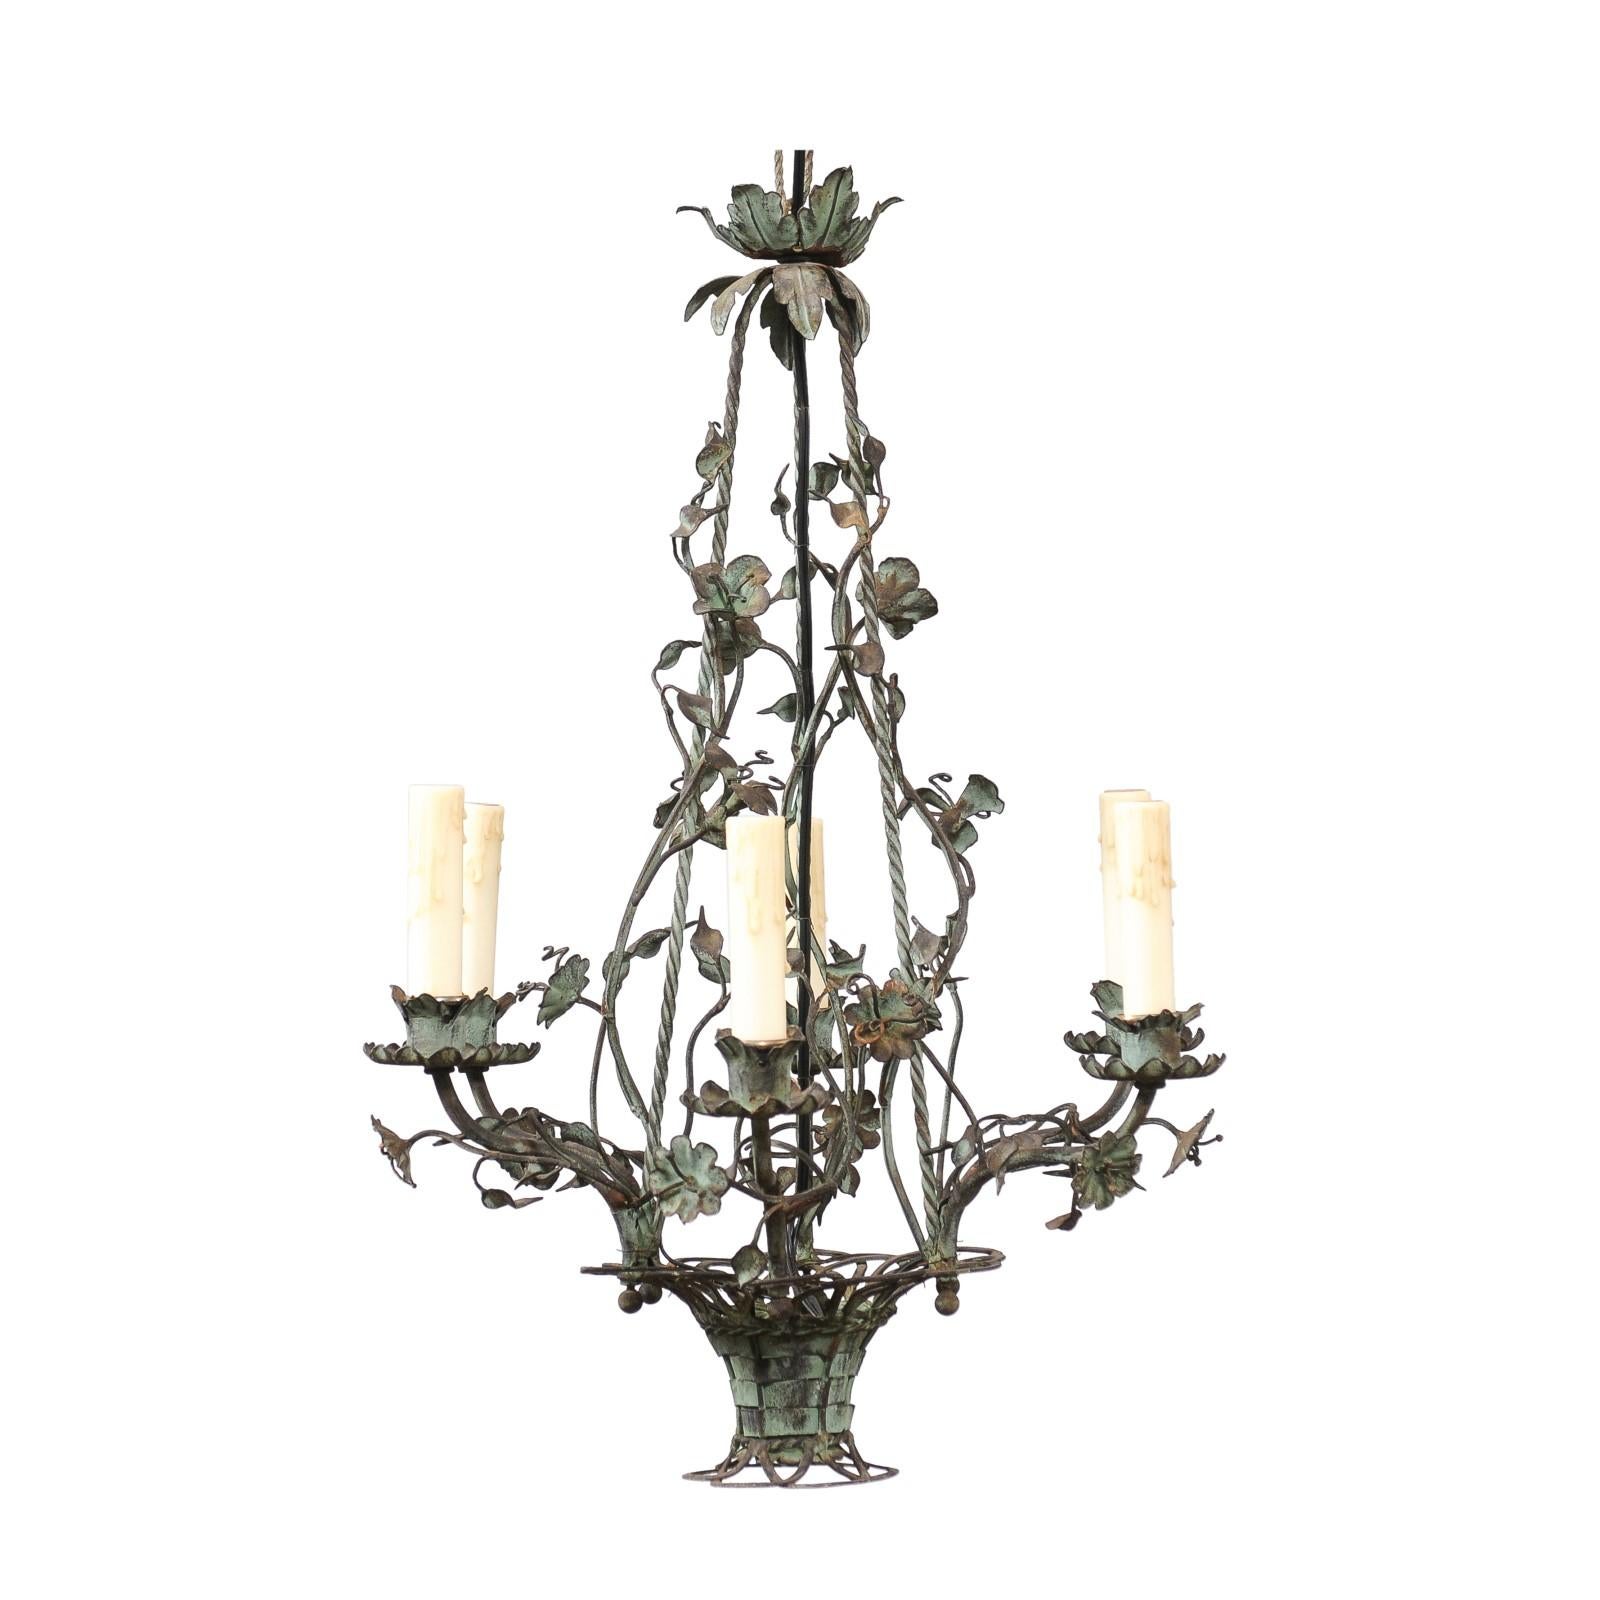 A French Belle Époque painted iron chandelier from circa 1900 with six lights, floral décor and verdigris patina. This French Belle Époque chandelier, dating back to around 1900, is a true testament to the opulence and intricate craftsmanship of its